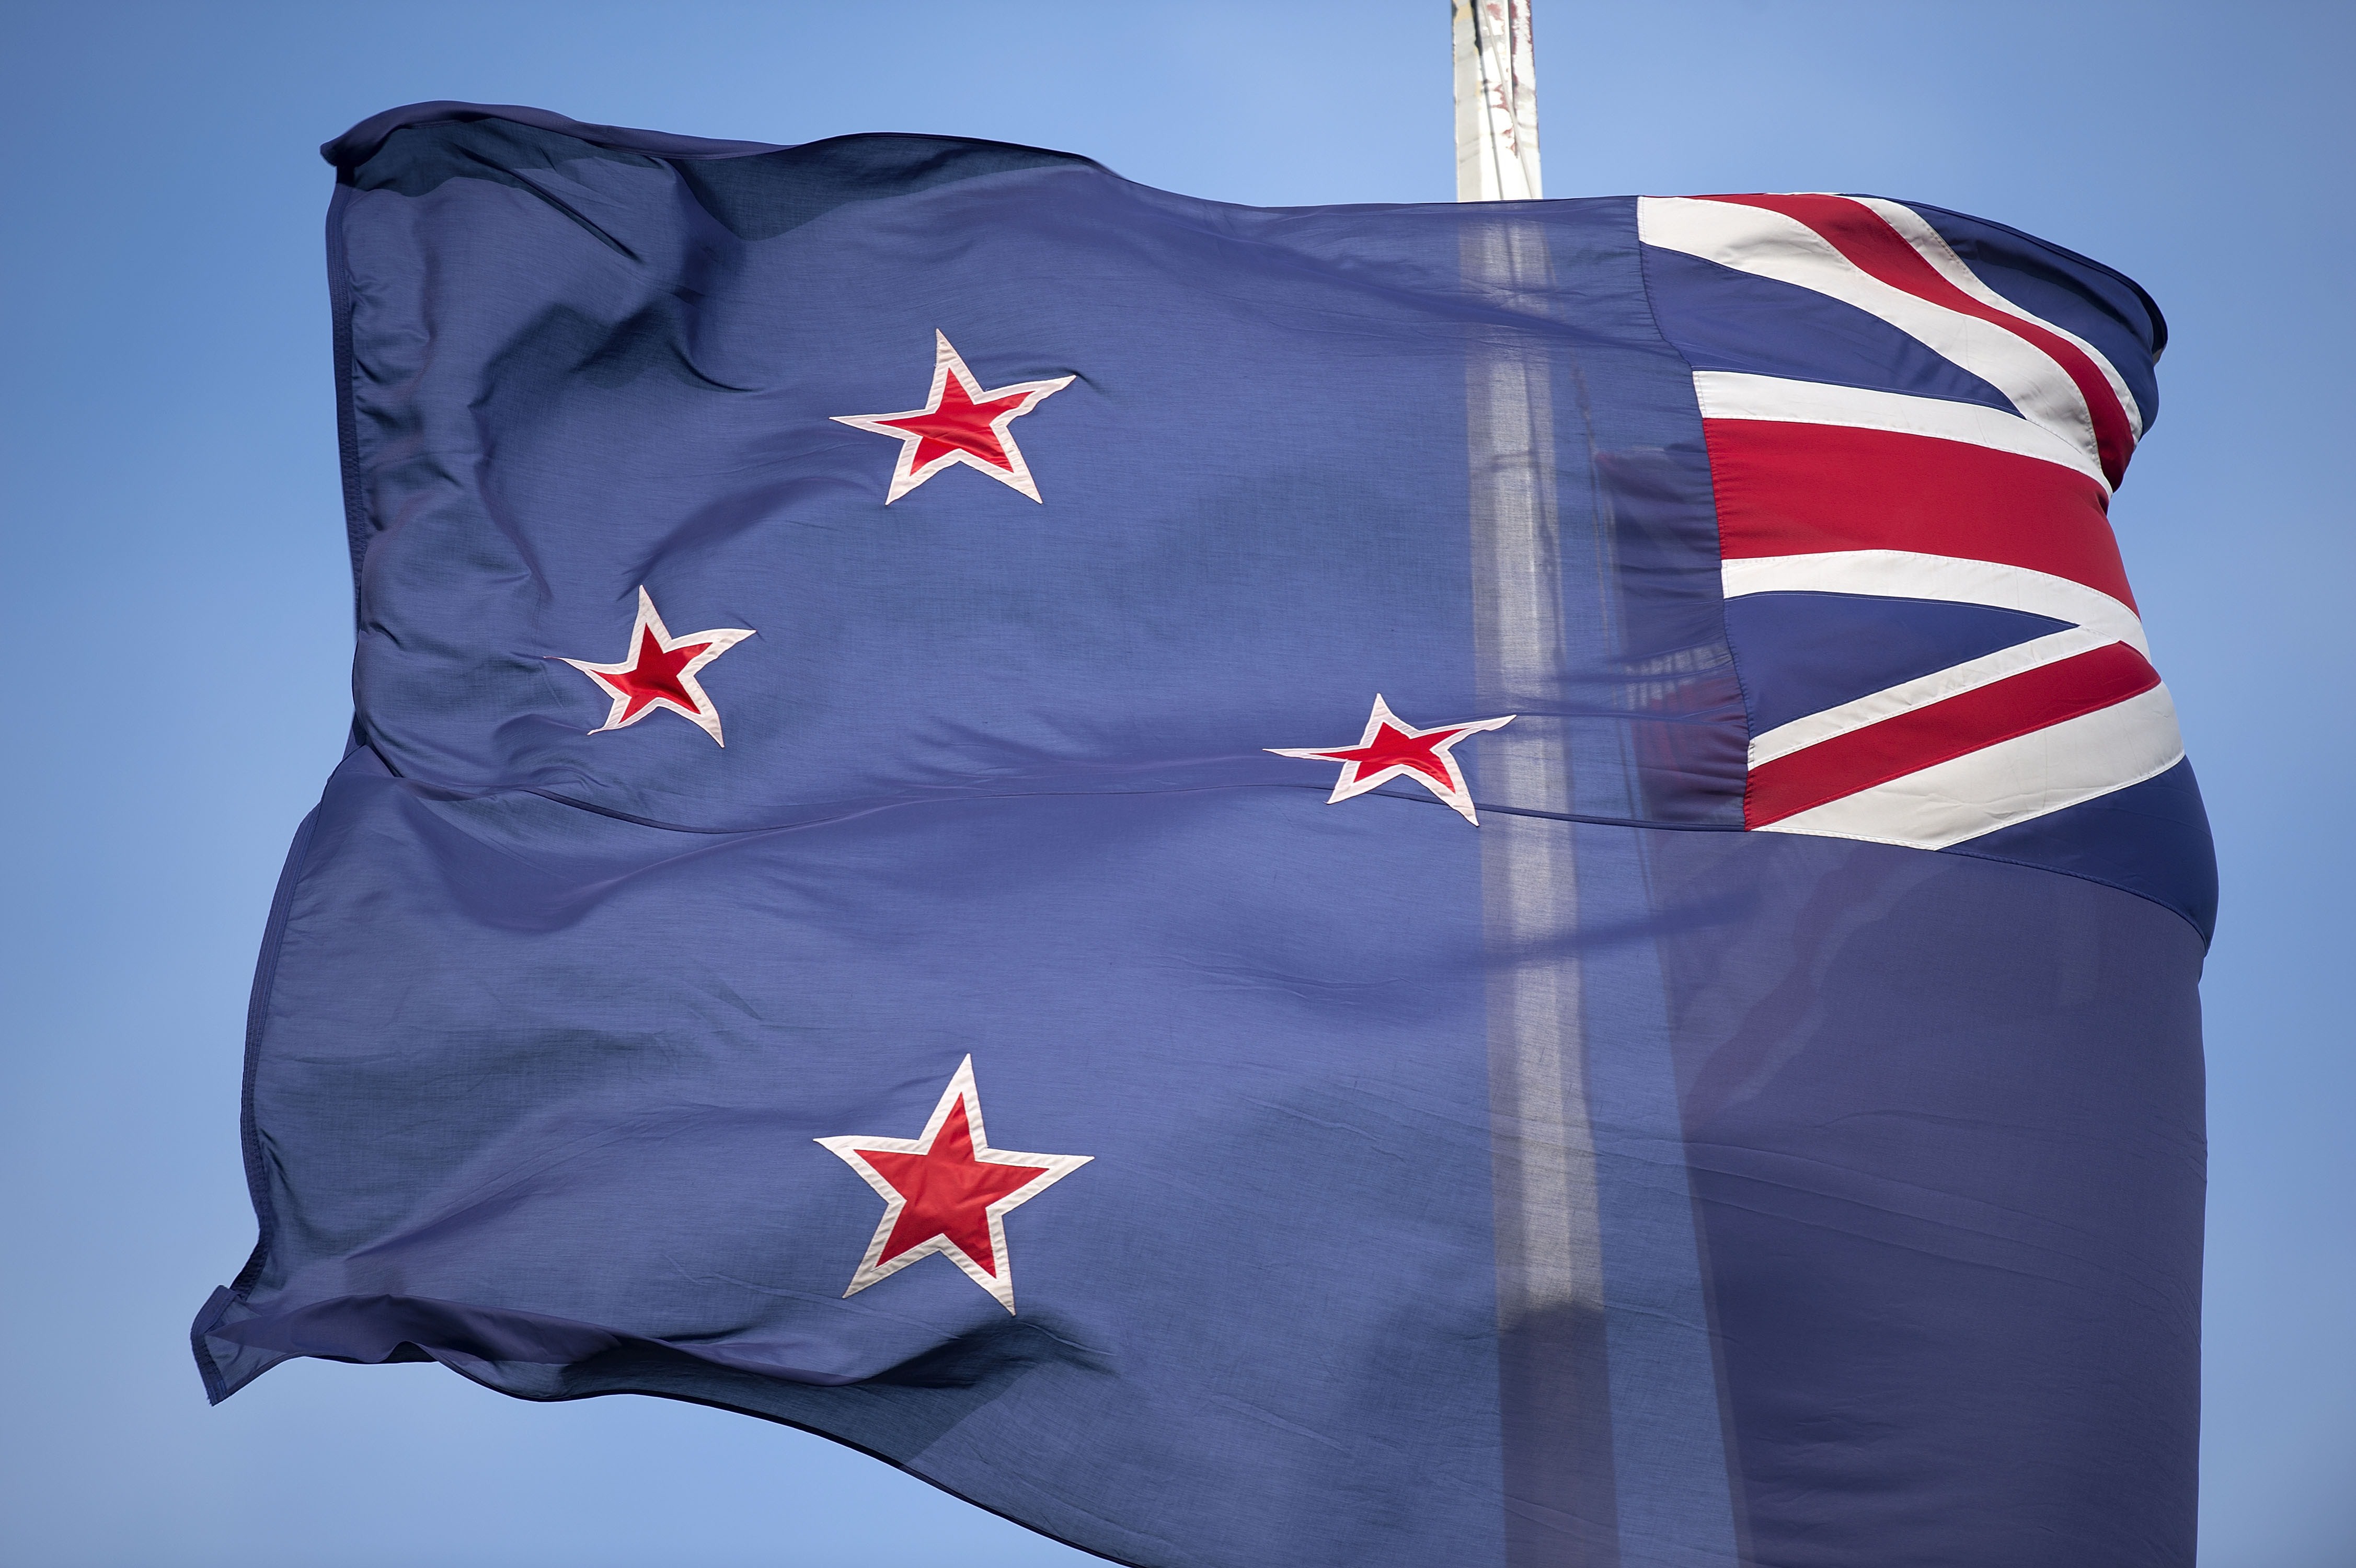 The current New Zealand flag flutters outside outside the New Zealand Post building in Wellington on Oct. 29, 2014 (Marty Melville—AFP/Getty Images)